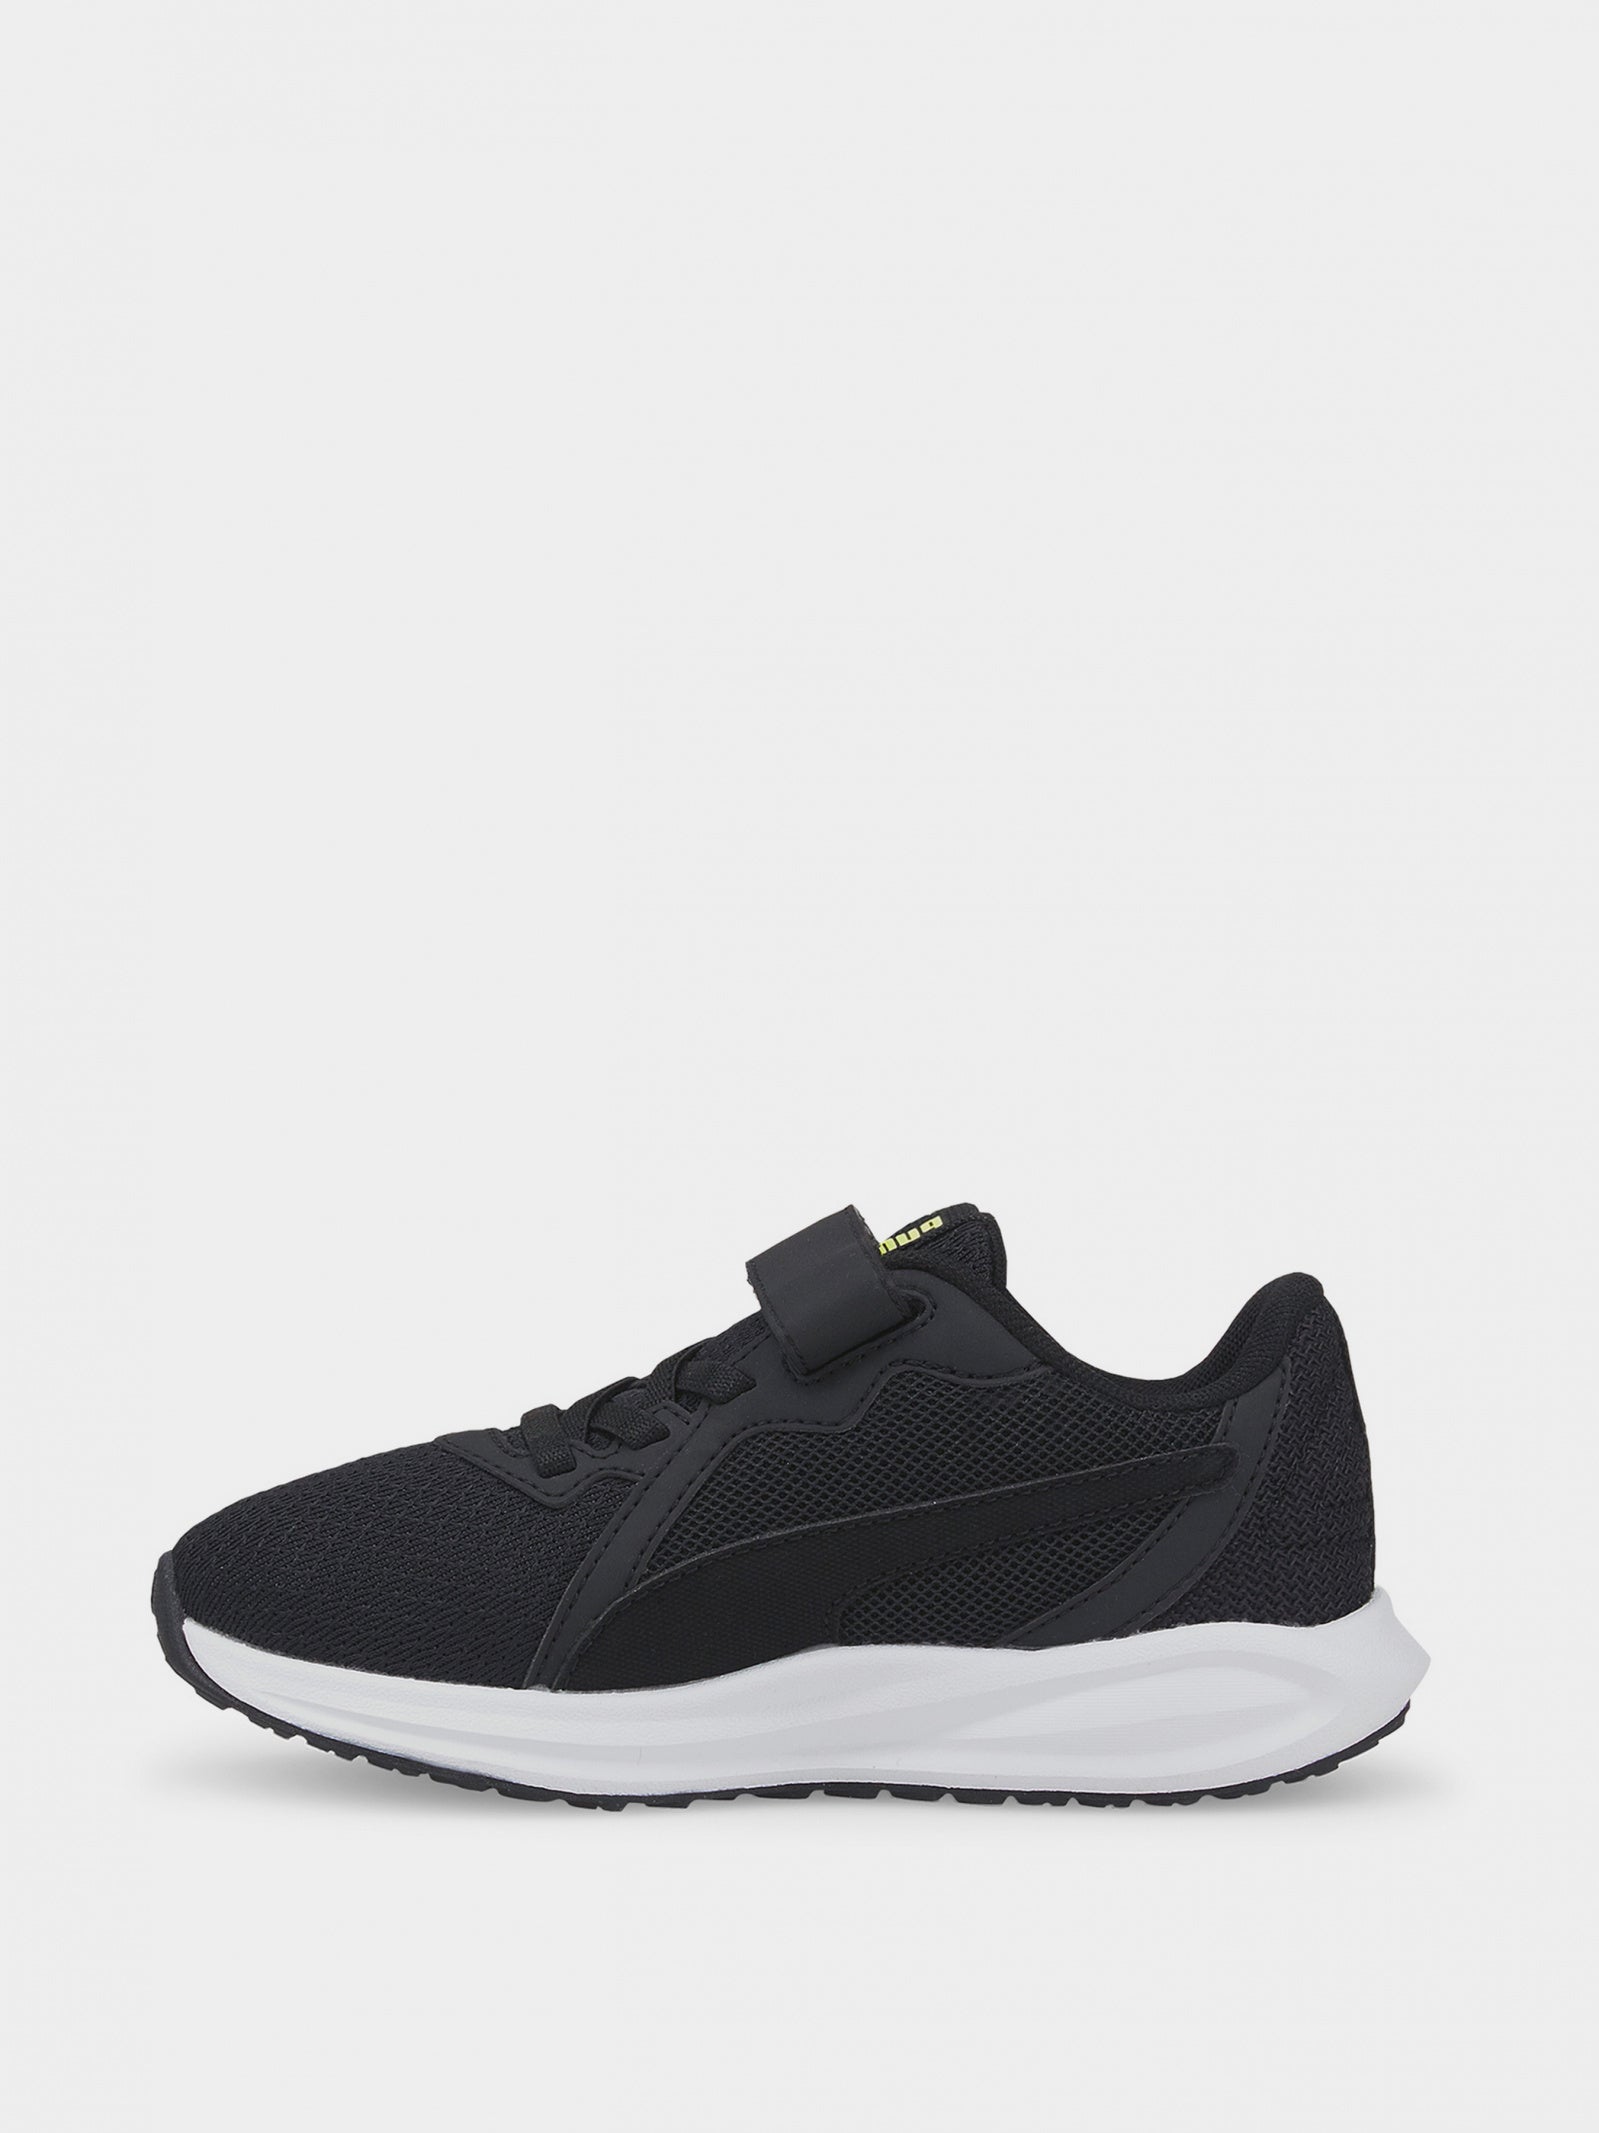 Twitch Runner AC Lifestyle Shoes